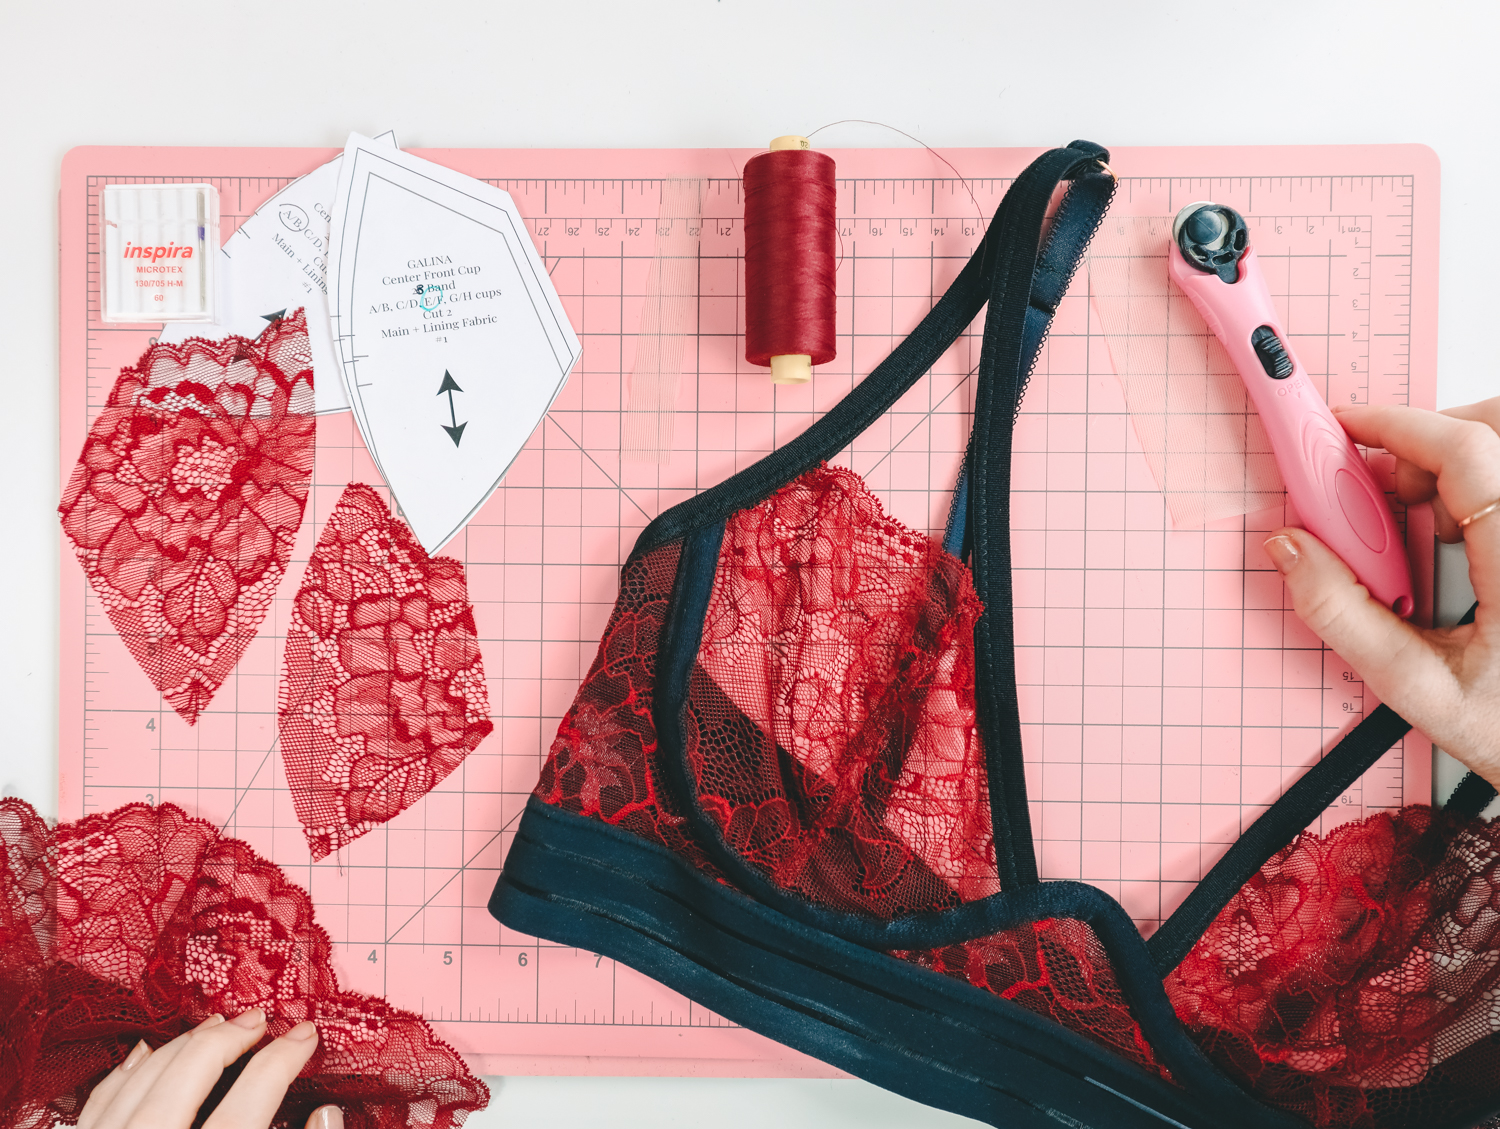 Advice, Resources and Supplies for Starting To Sew Lingerie - Melly Sews